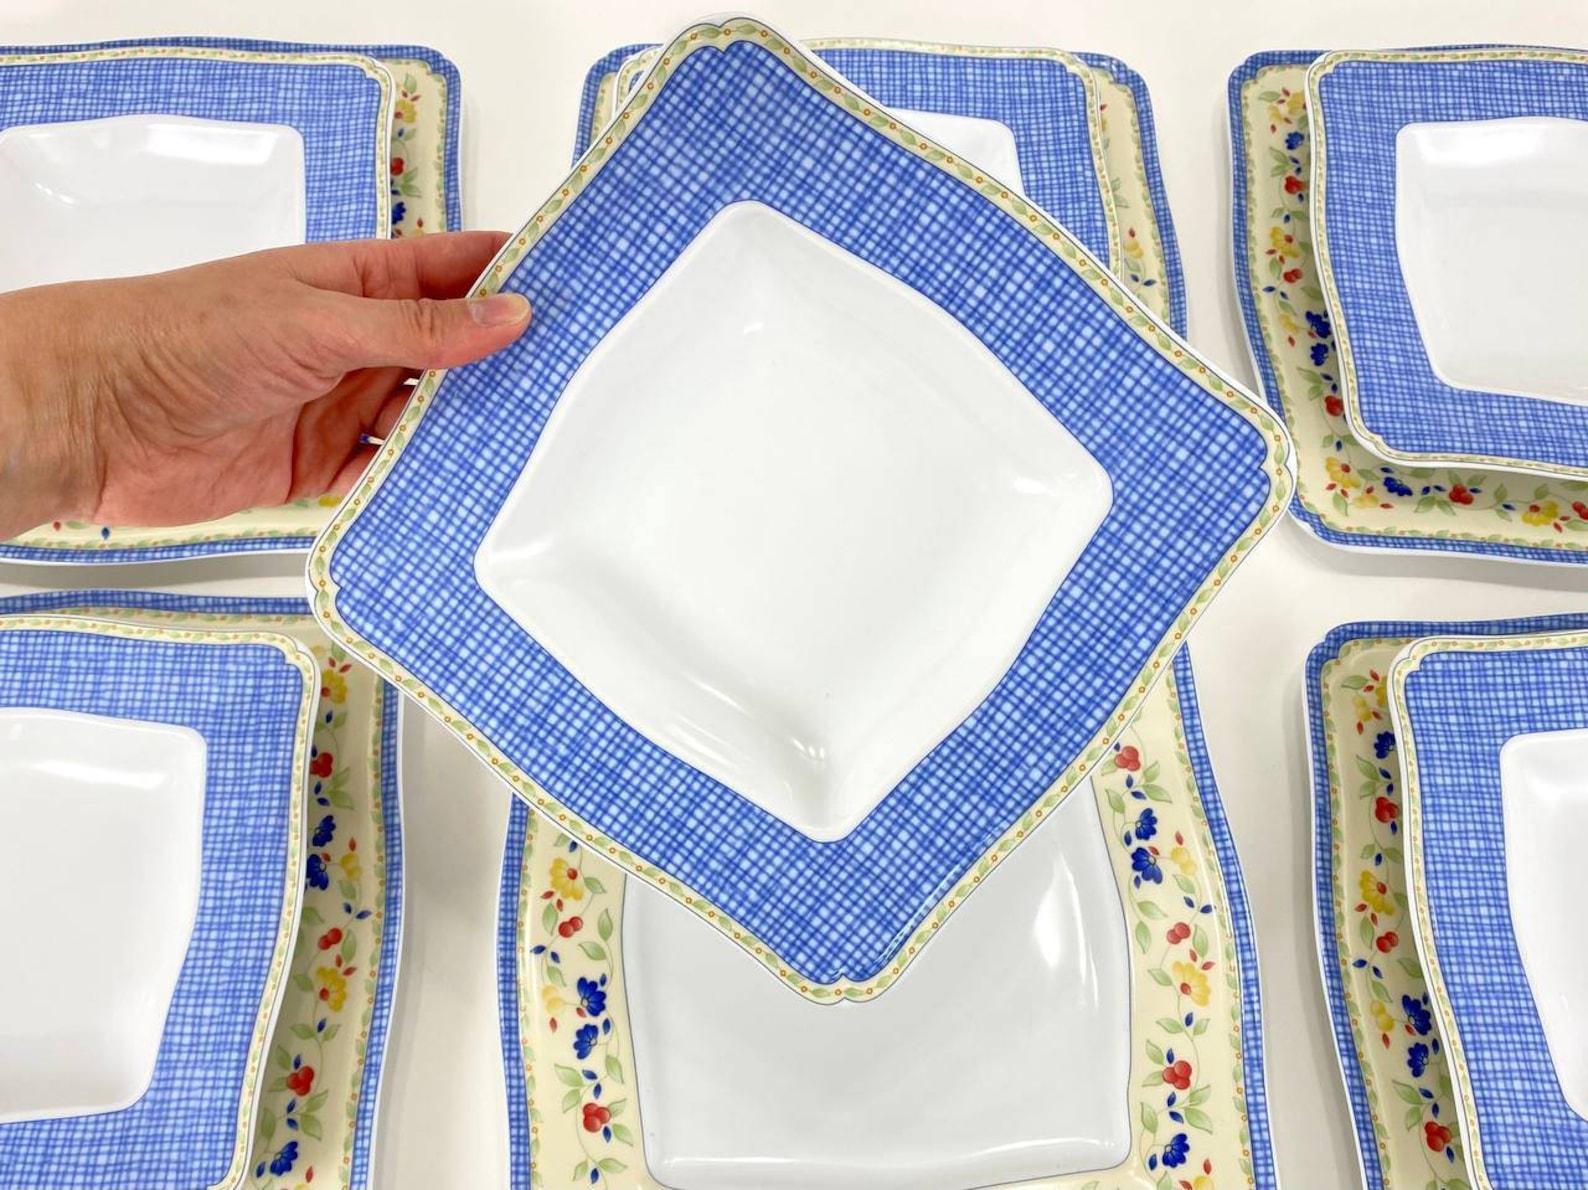 Set of German porcelain deep dinner plates in an elegant square shape and suitable charger plates hand-painted in blue glaze, and floral pattern. From famous company Van Well. 

The charger plate plays a special role in setting the table - it is